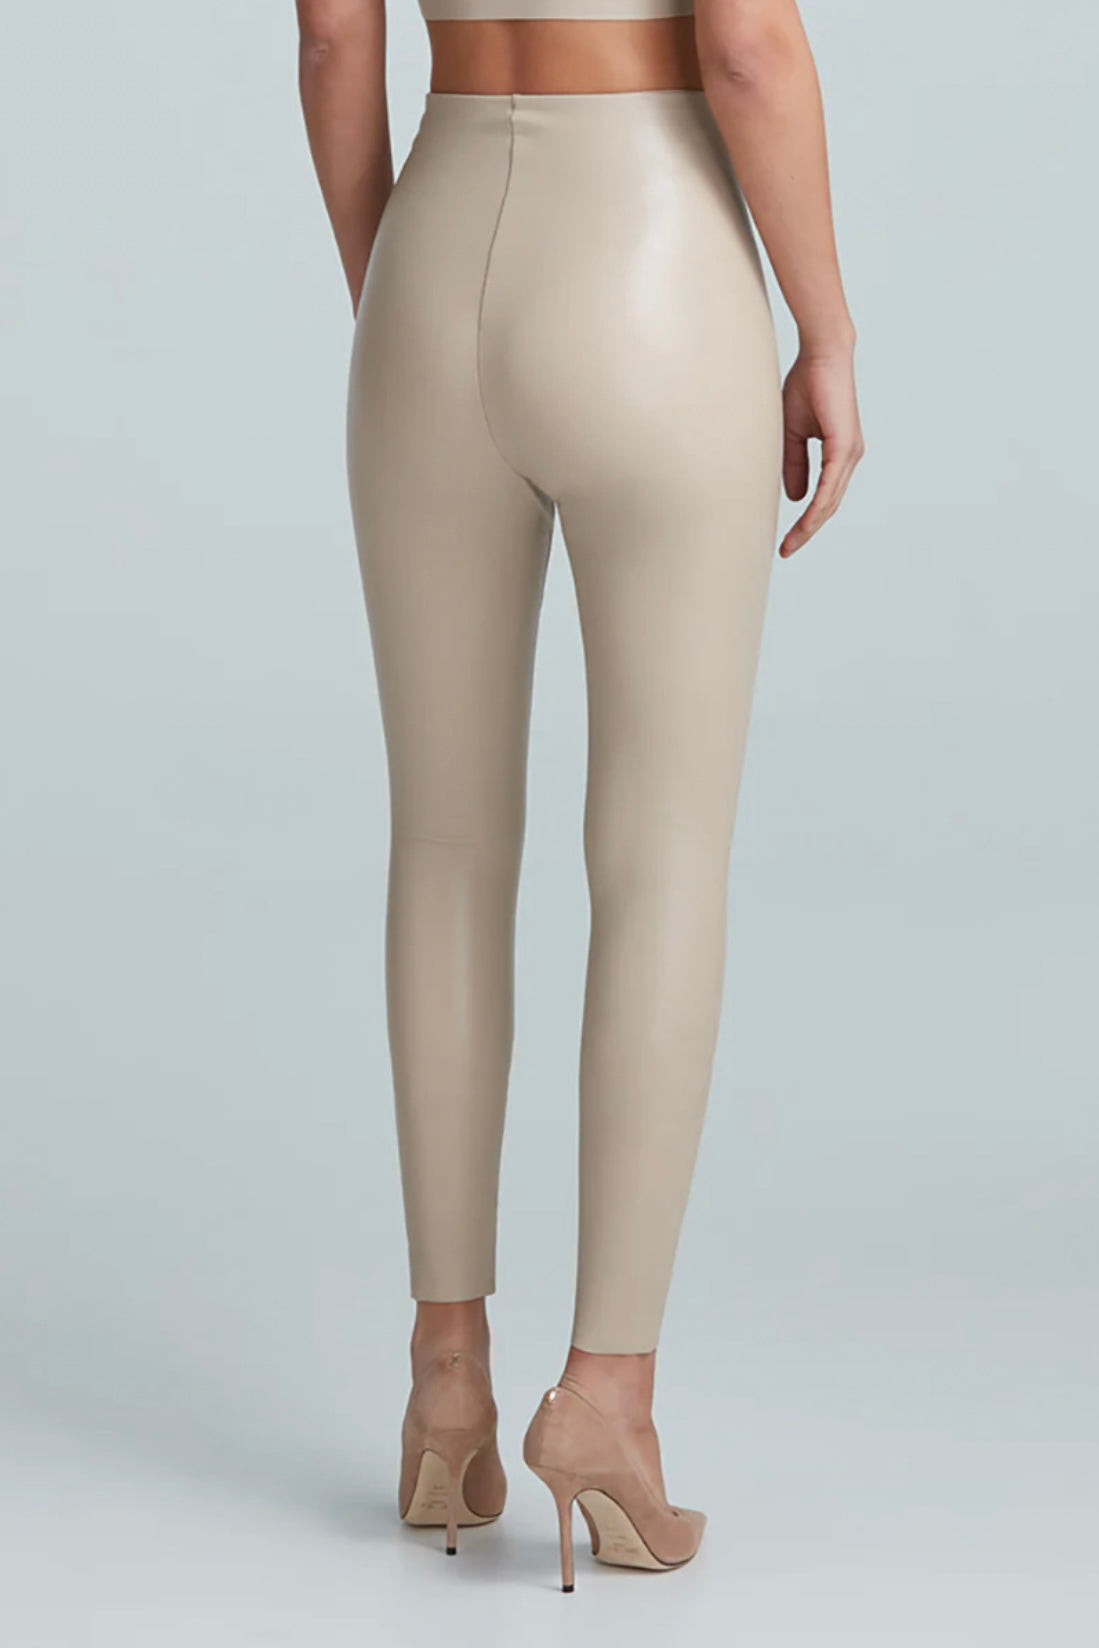 The Jora Faux Leather High Waist Legging In Camel • Impressions